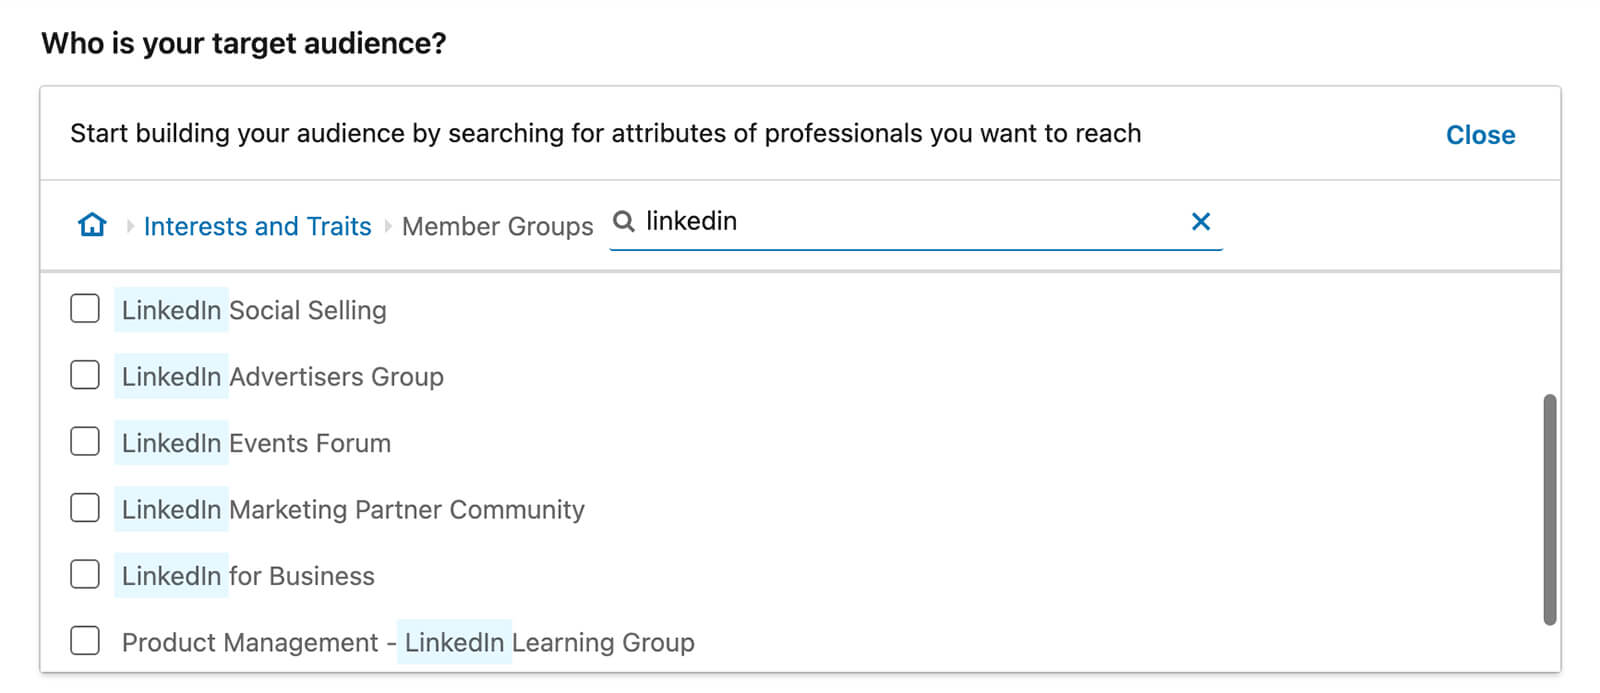 how-to-use-targeting-get-in-front-of-competitor-audiences-on-linkedin-member-groups-step-23